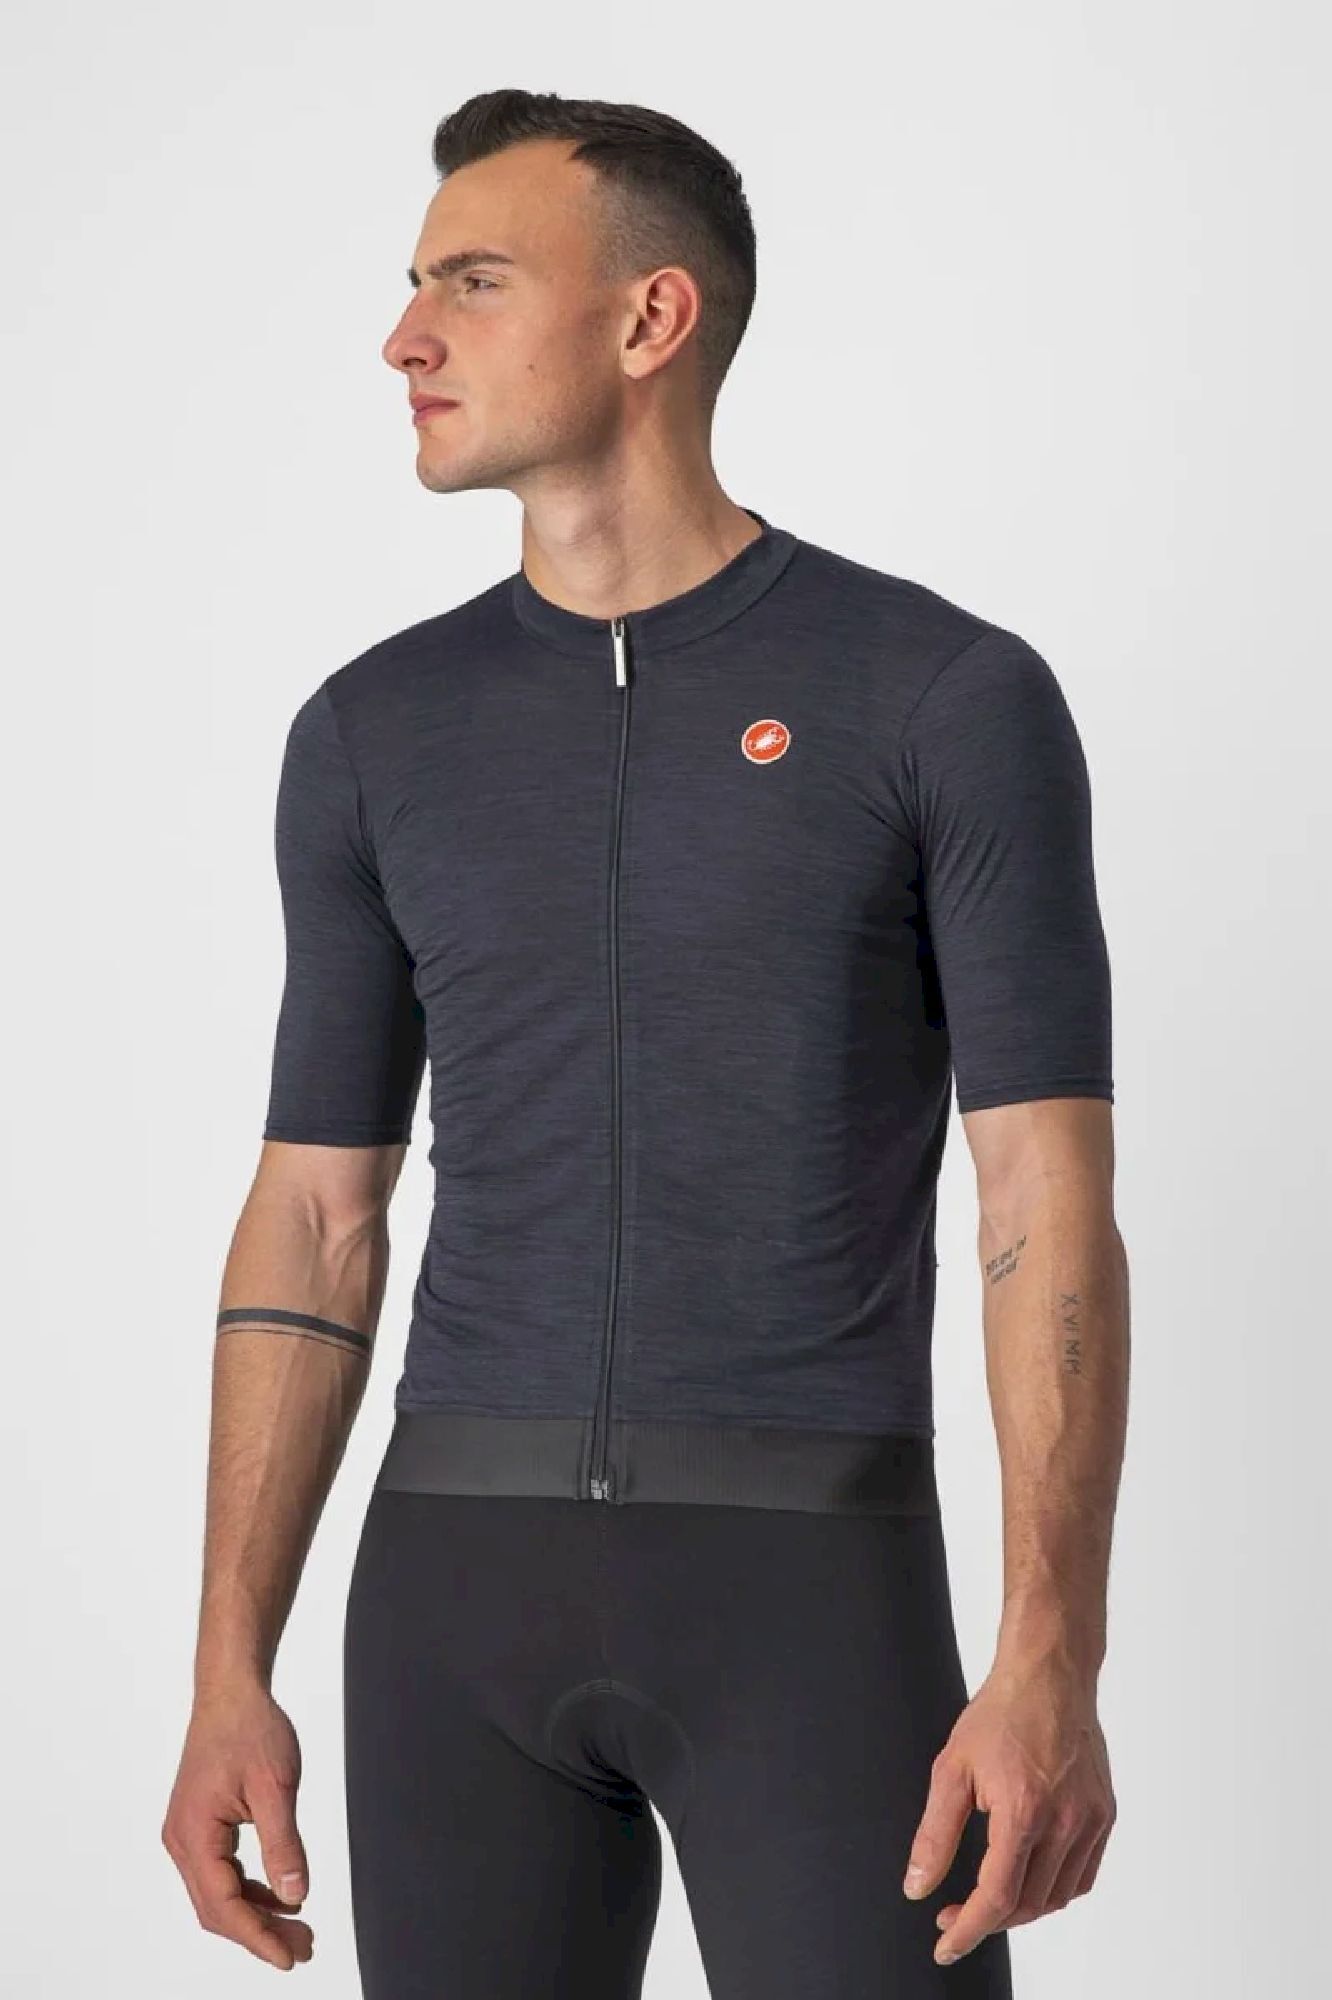 Castelli Essenza Jersey - Maillot ciclismo - Hombre | Hardloop